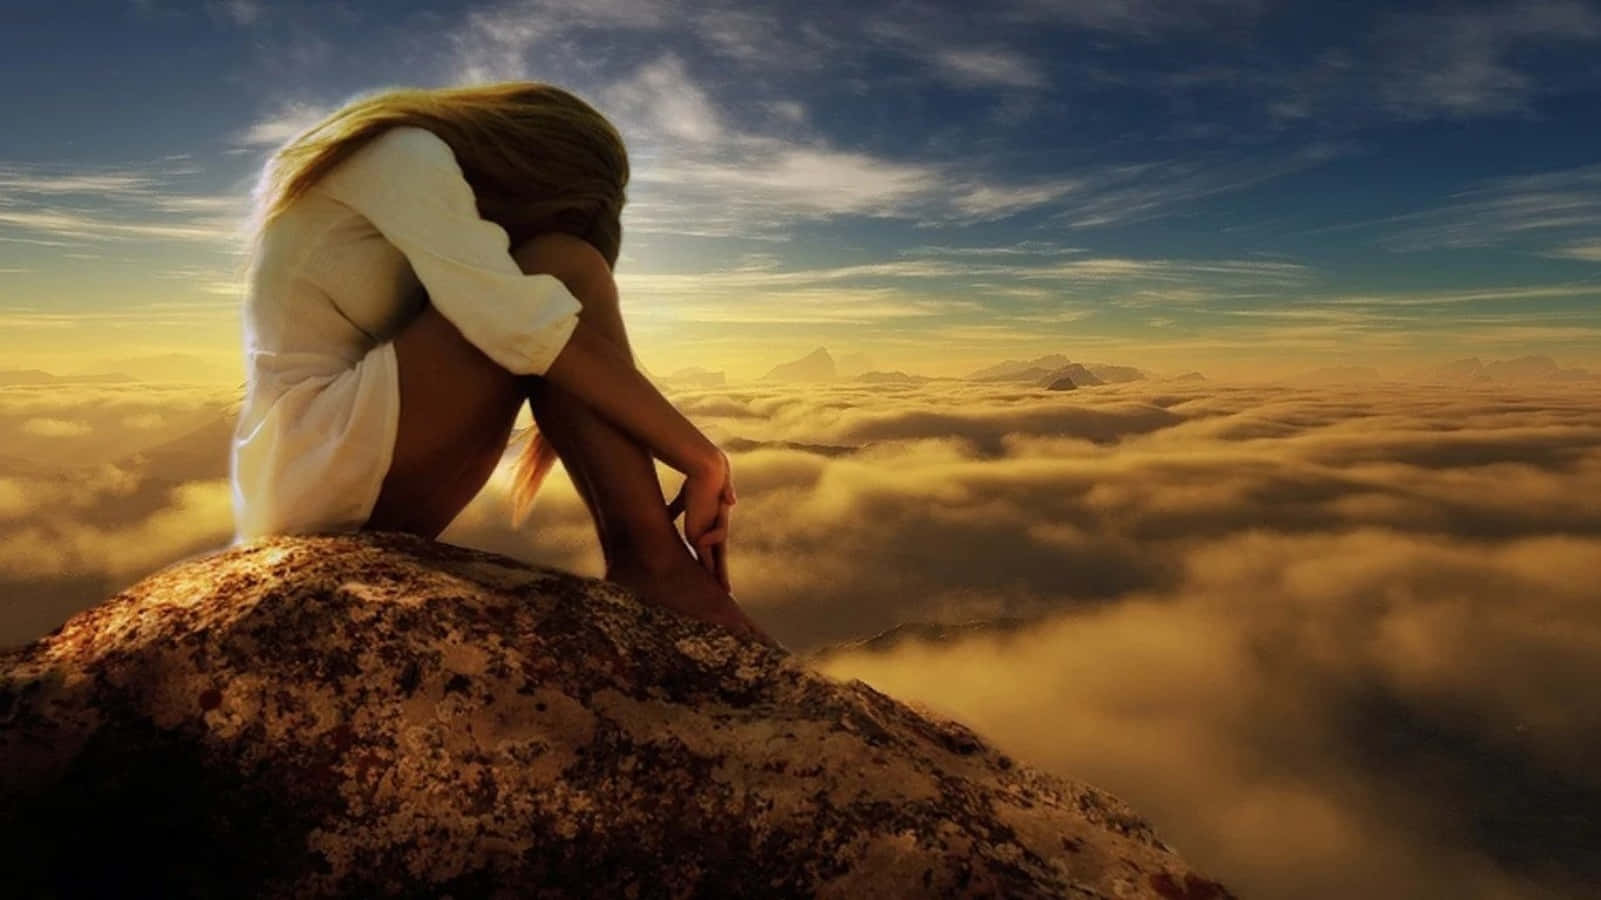 A Woman Sitting On Top Of A Mountain With Clouds In The Background